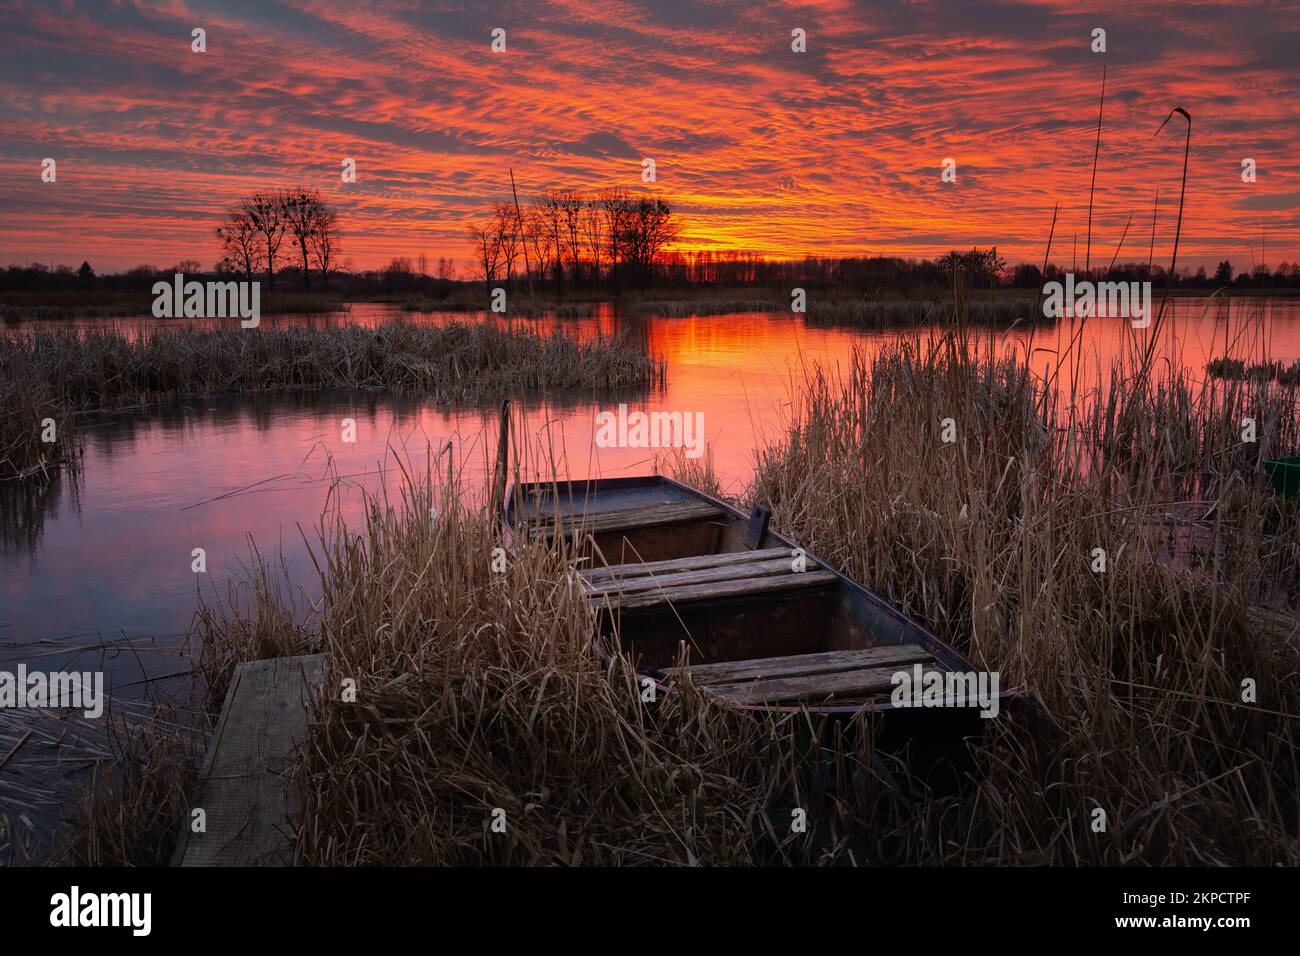 An old boat in the reeds on the lake shore and a beautiful sunset, Stankow, Poland Stock Photo